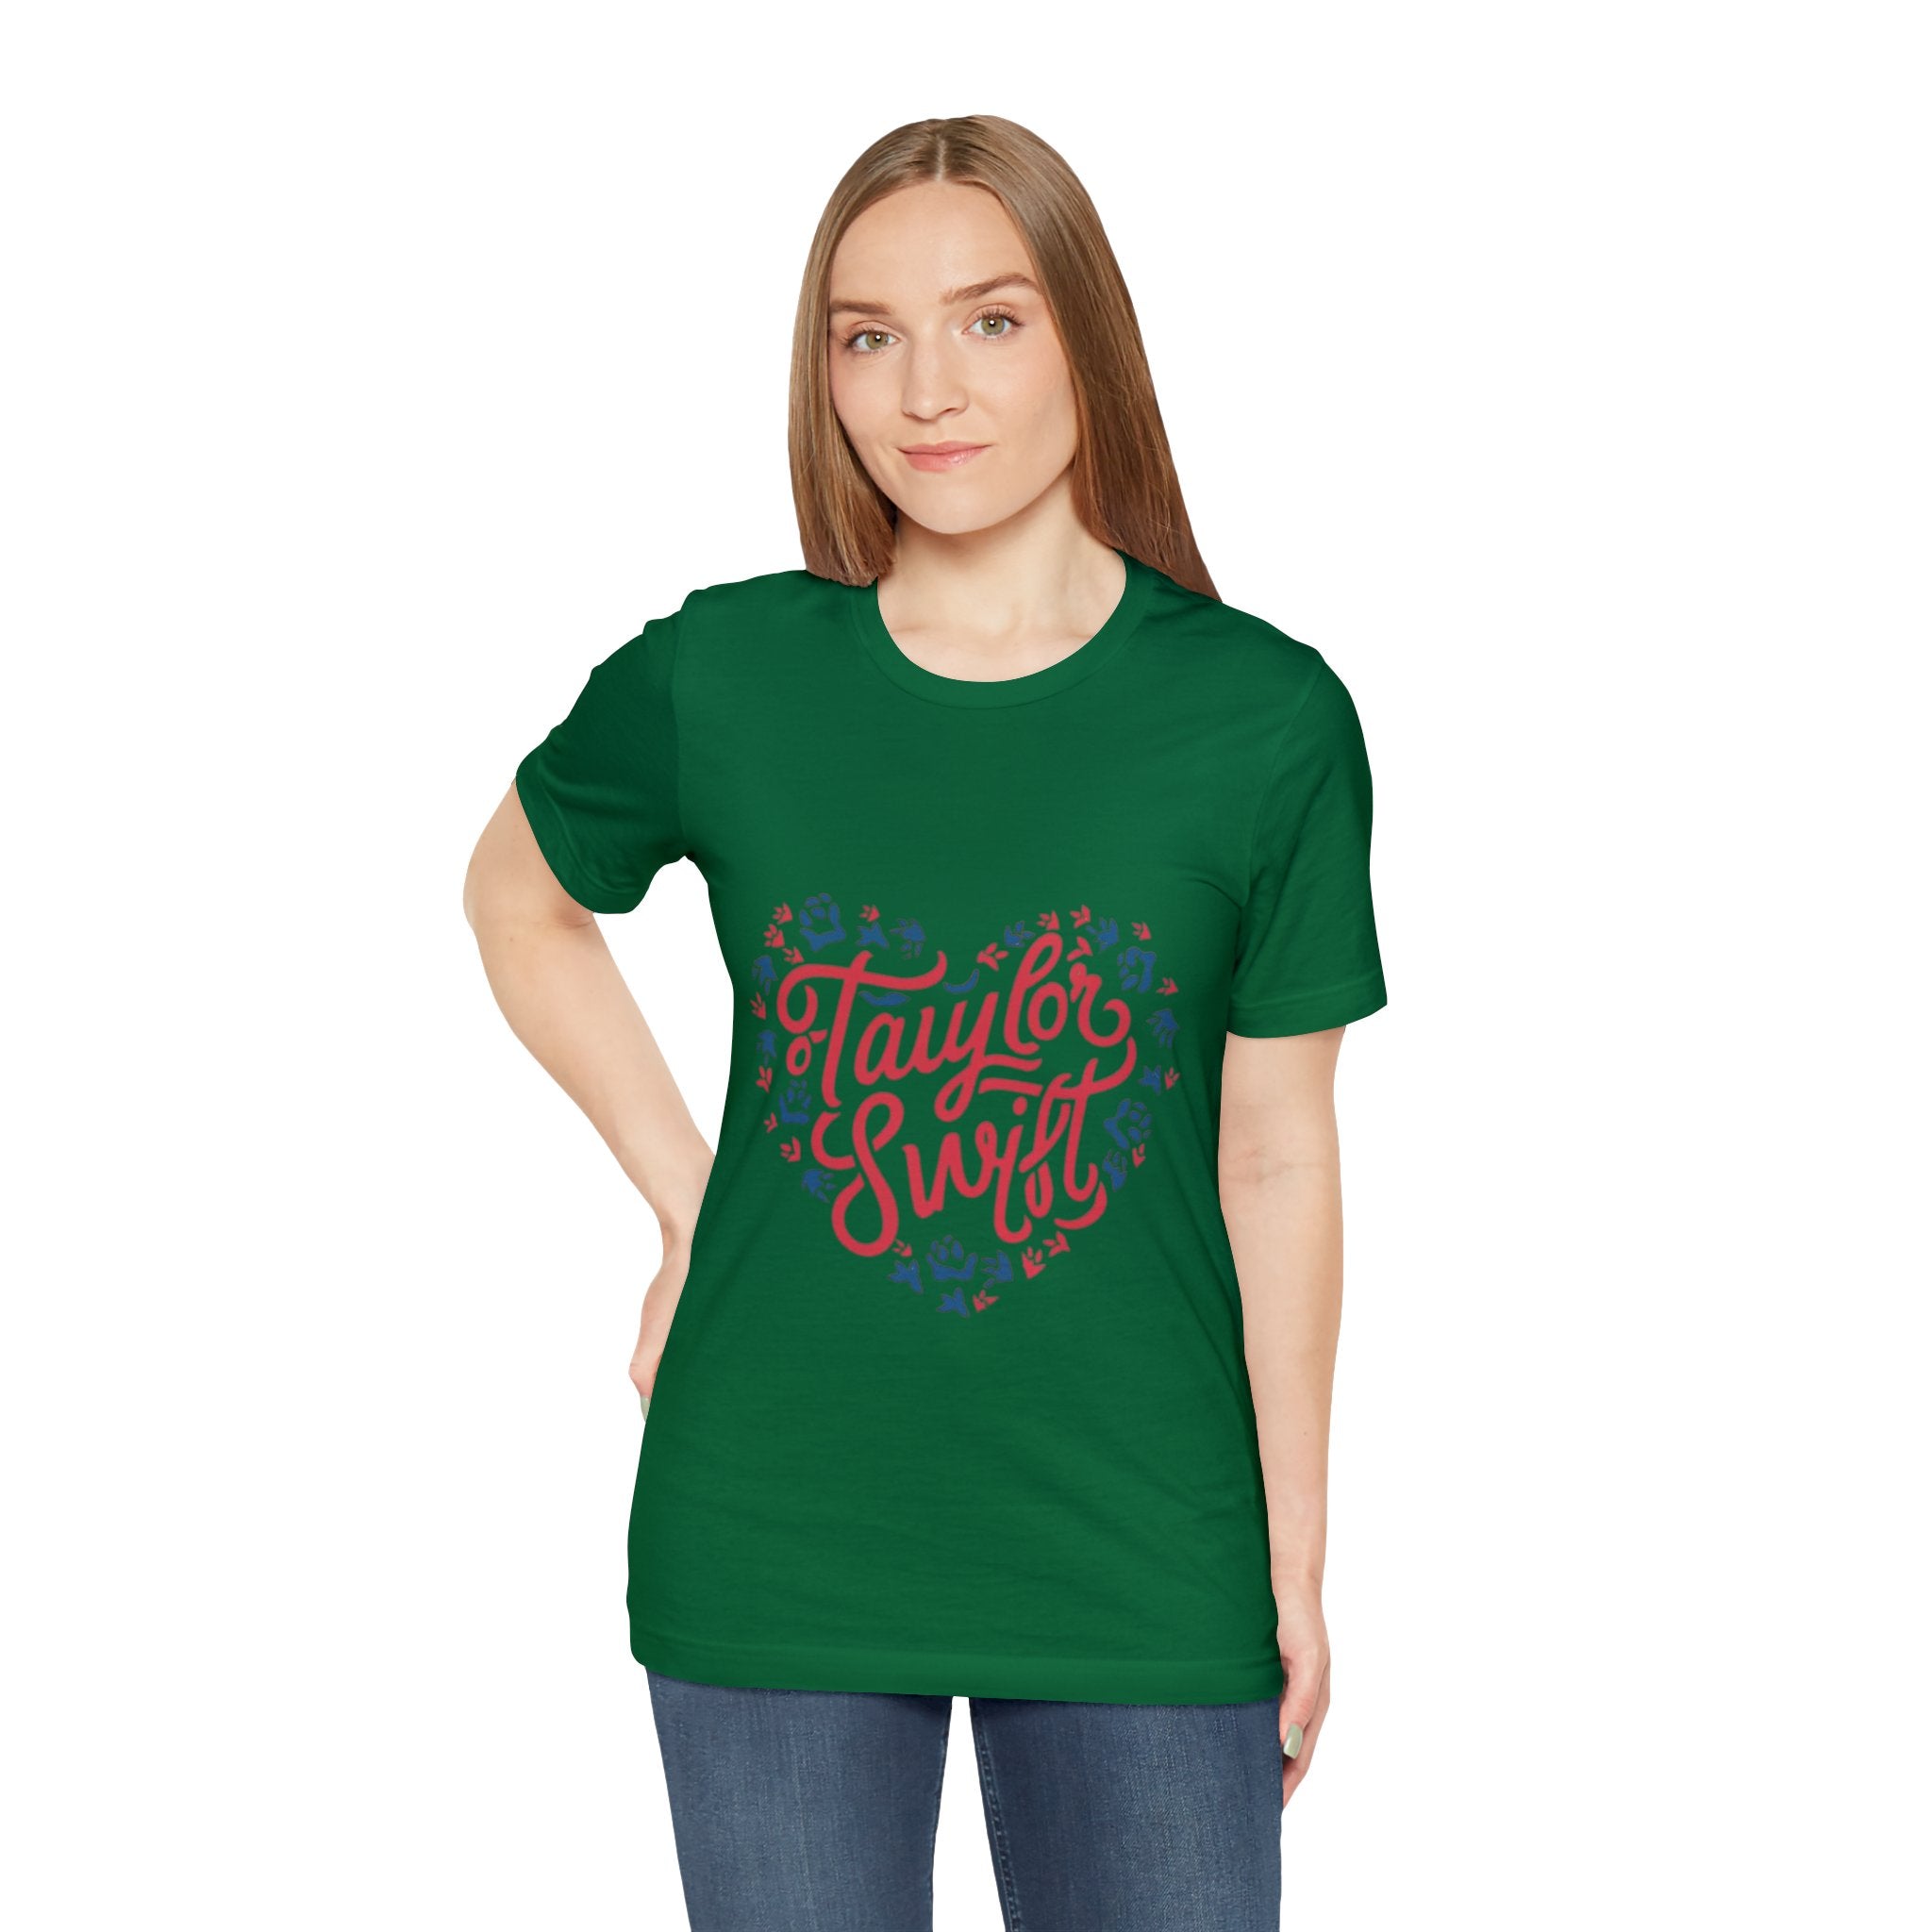 Unisex Jersey Short Sleeve Tee. A Purr-fect Blend of Pet Love and Taylor Admiration!